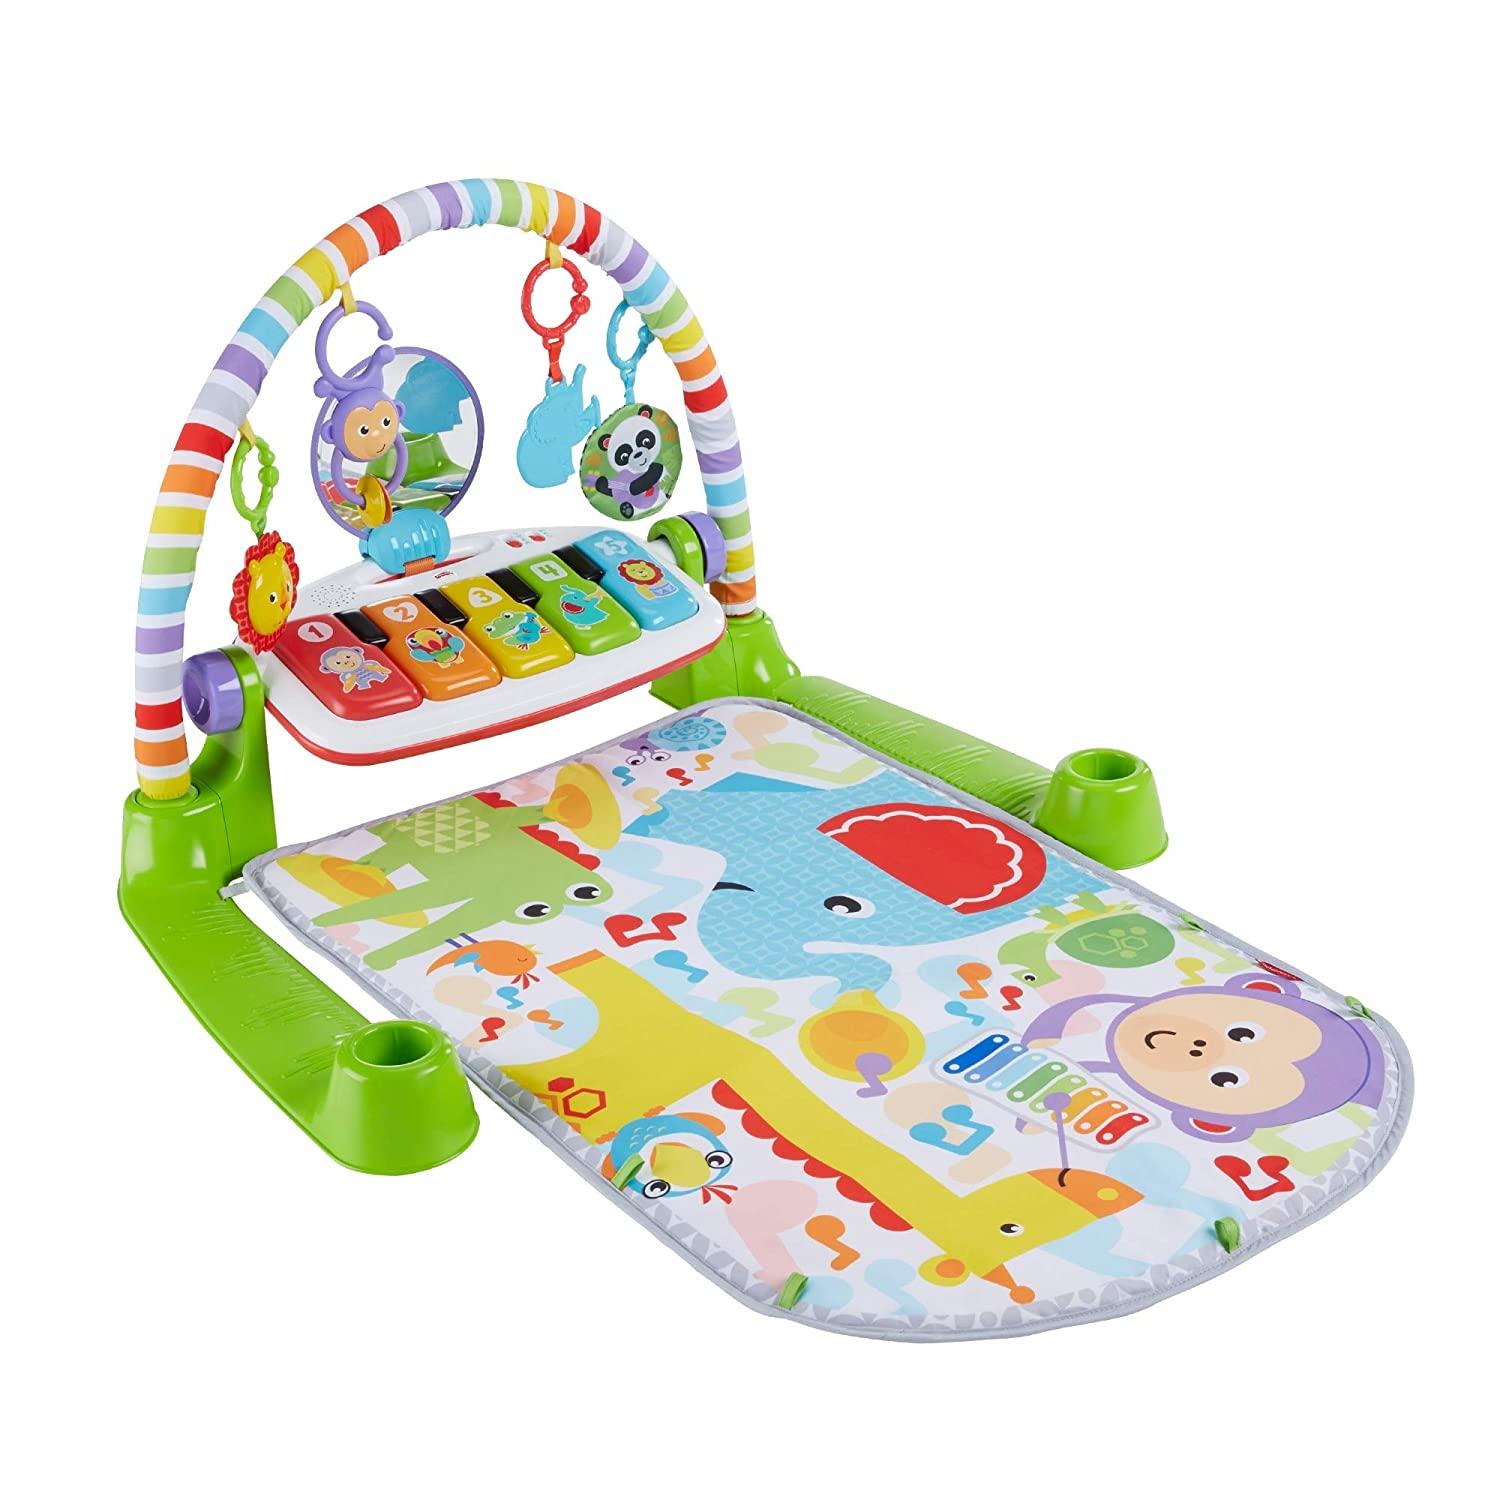 Fisher-Price Deluxe Kick n Play Piano Gym for $24.99